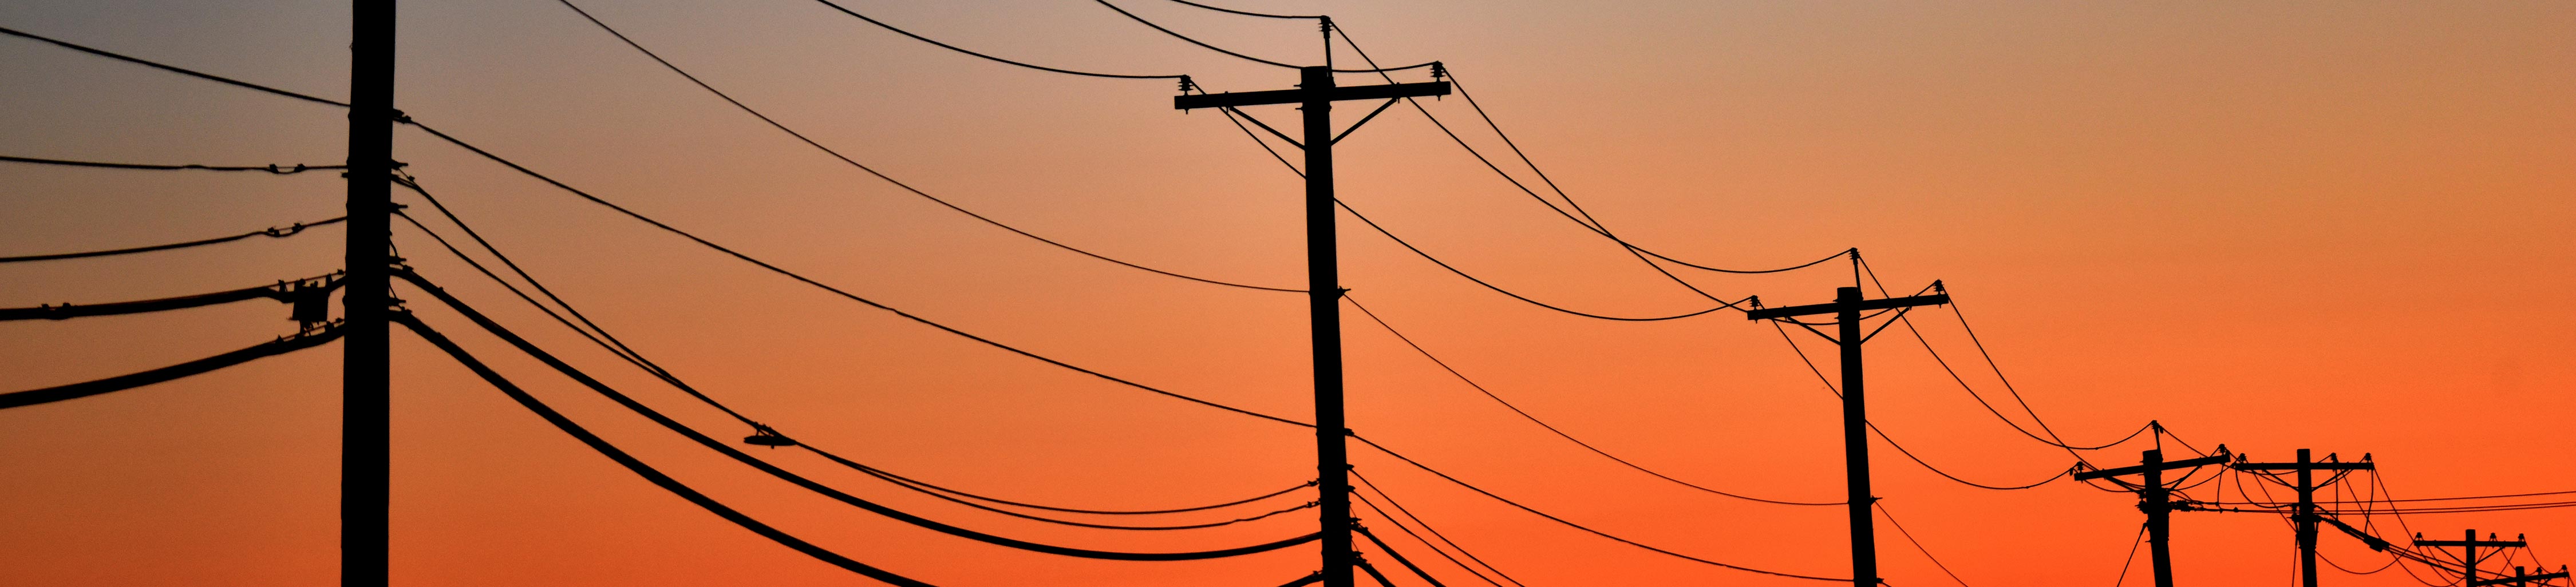 Image of powerlines at sunset.